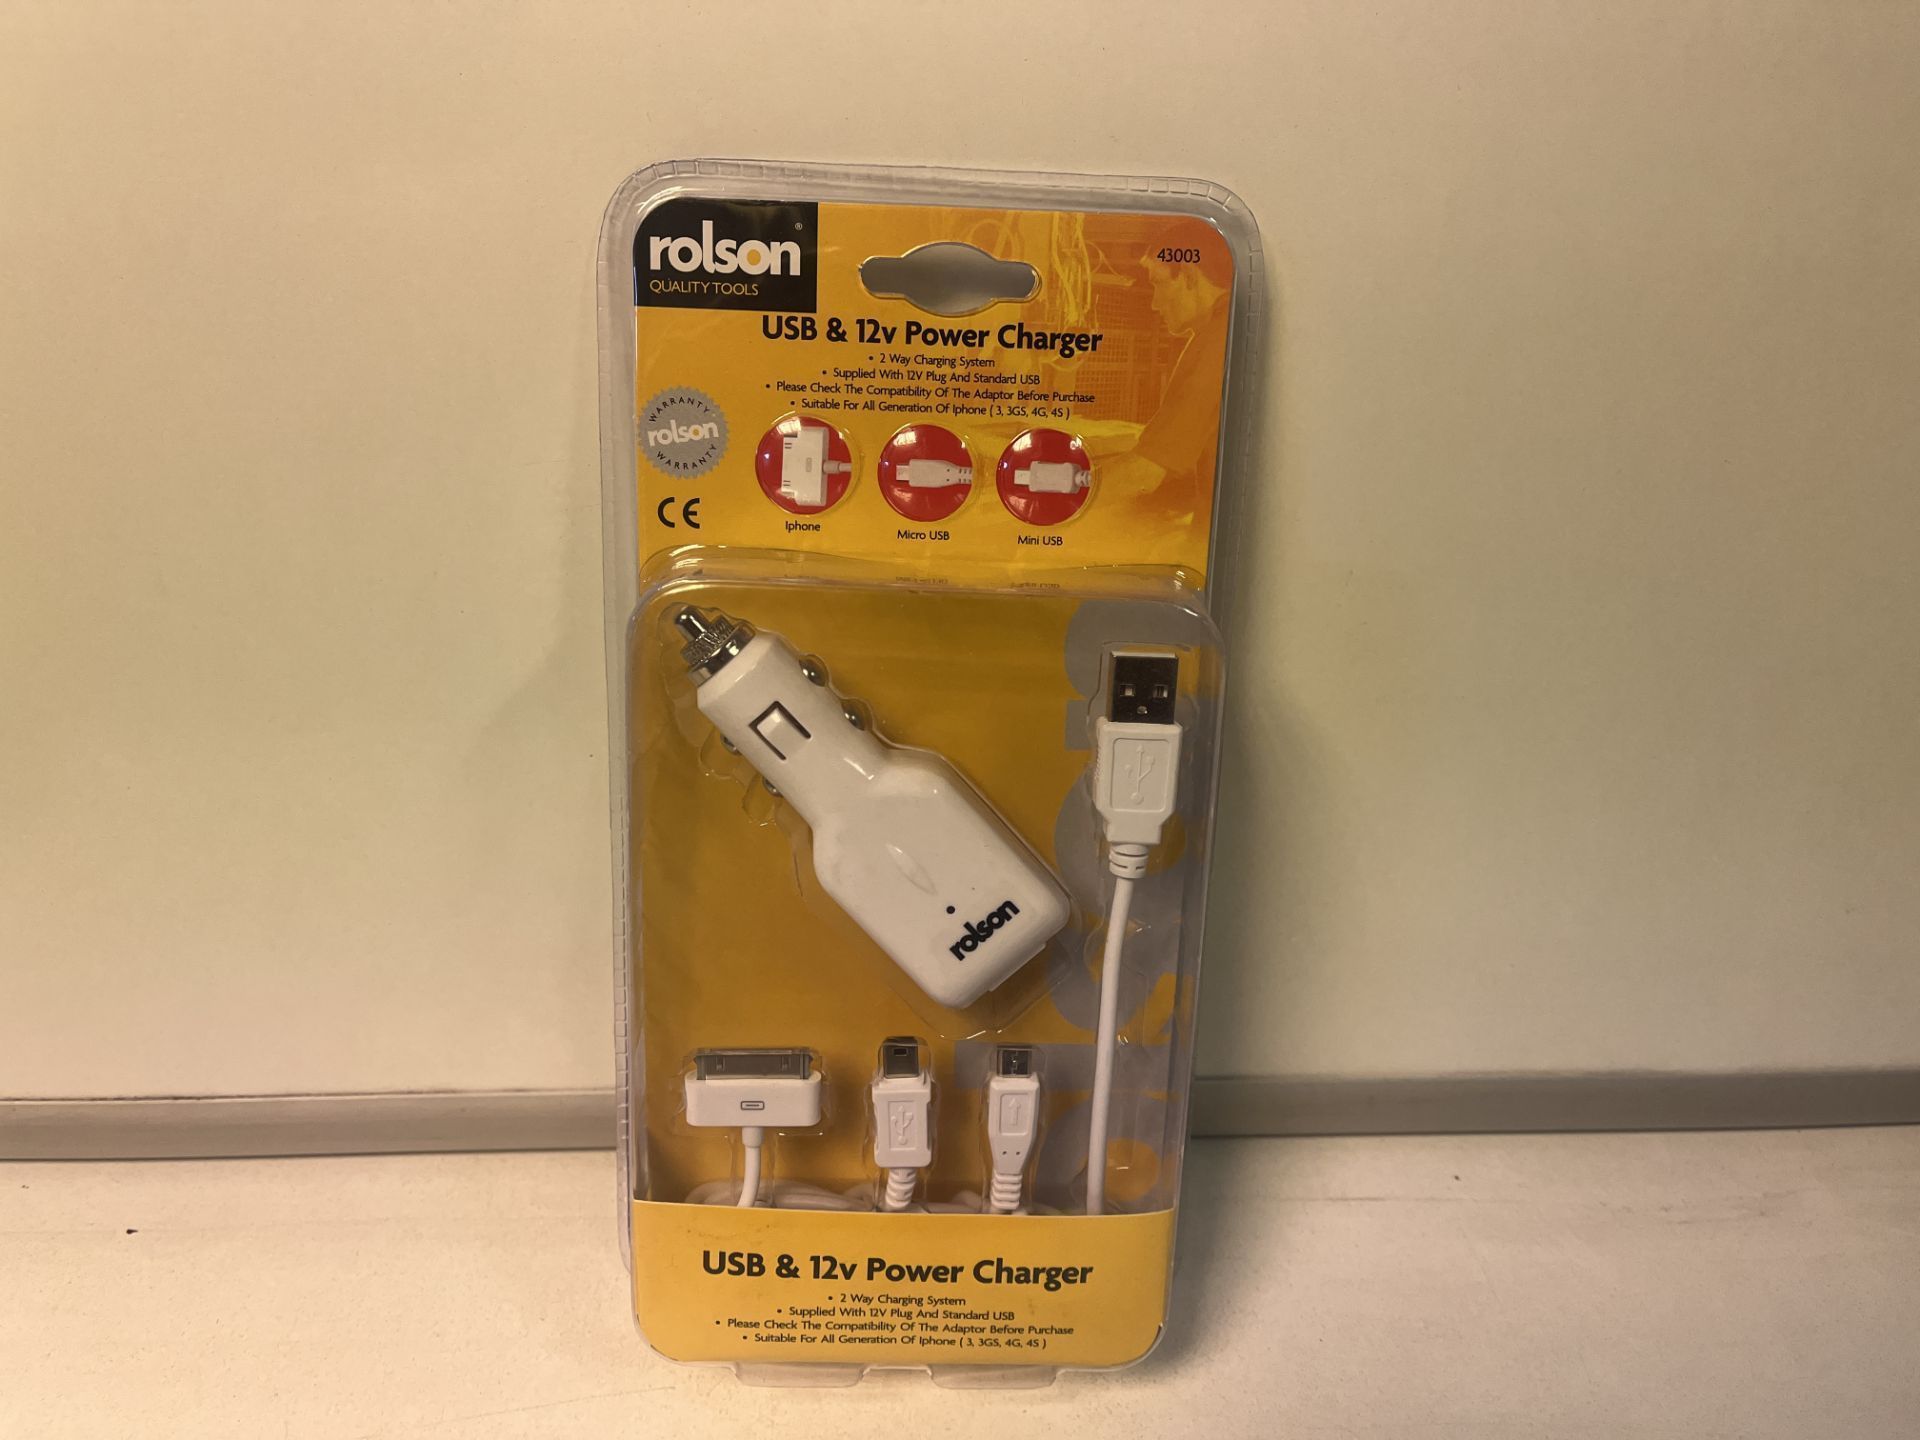 30 X BRAND NEW ROLSON USB AND 12V POWER CHARGERS WITH MULTIPLE CONNECTORS R5